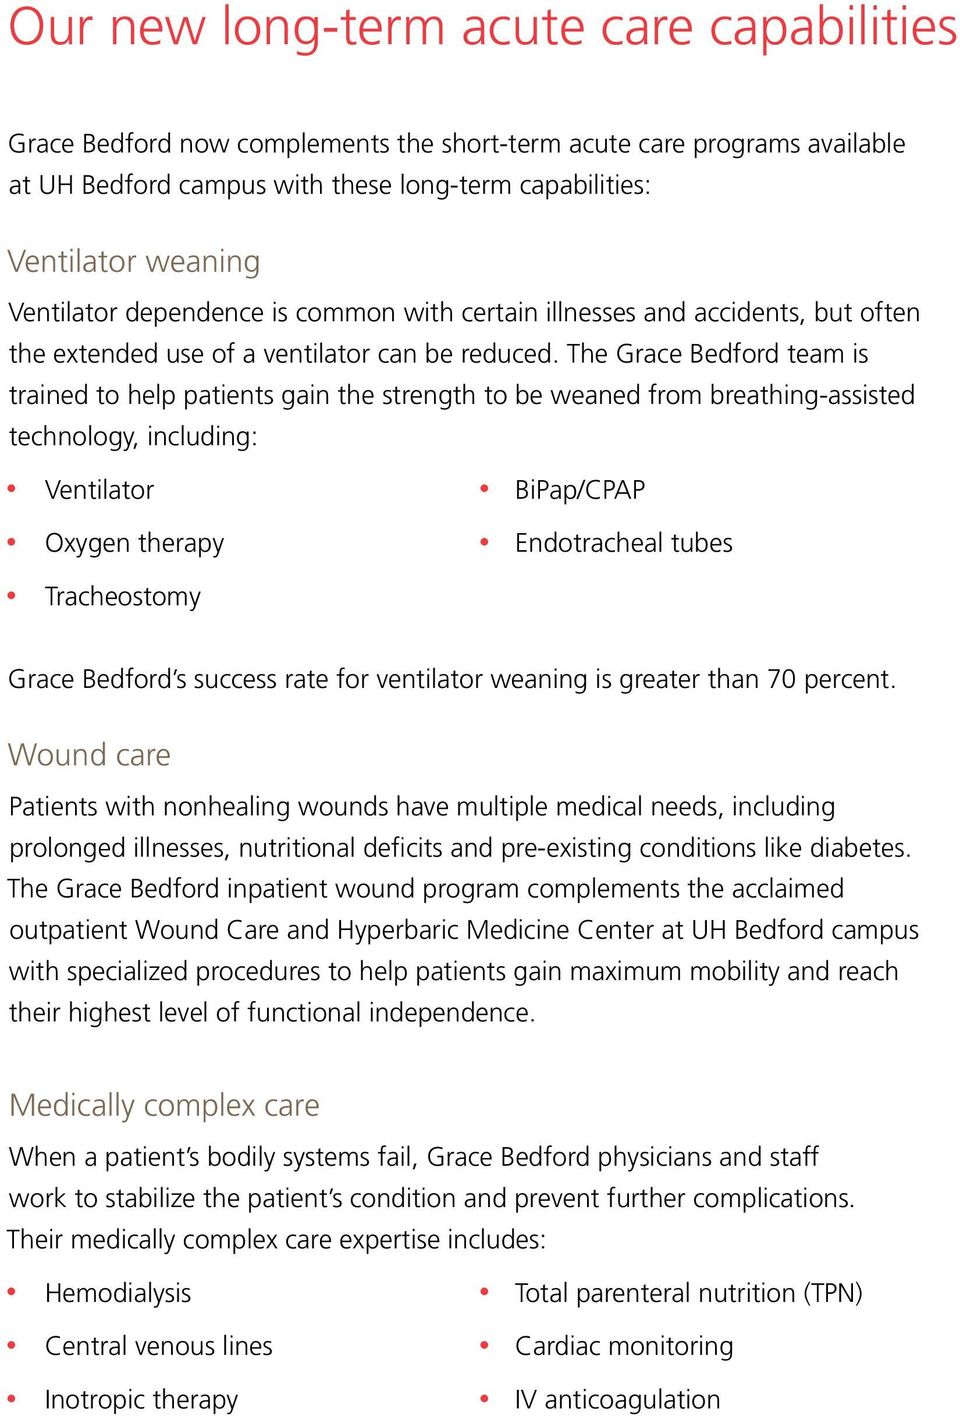 The Grace Bedford team is trained to help patients gain the strength to be weaned from breathing-assisted technology, including: Ventilator BiPap/CPAP Oxygen therapy Endotracheal tubes Tracheostomy